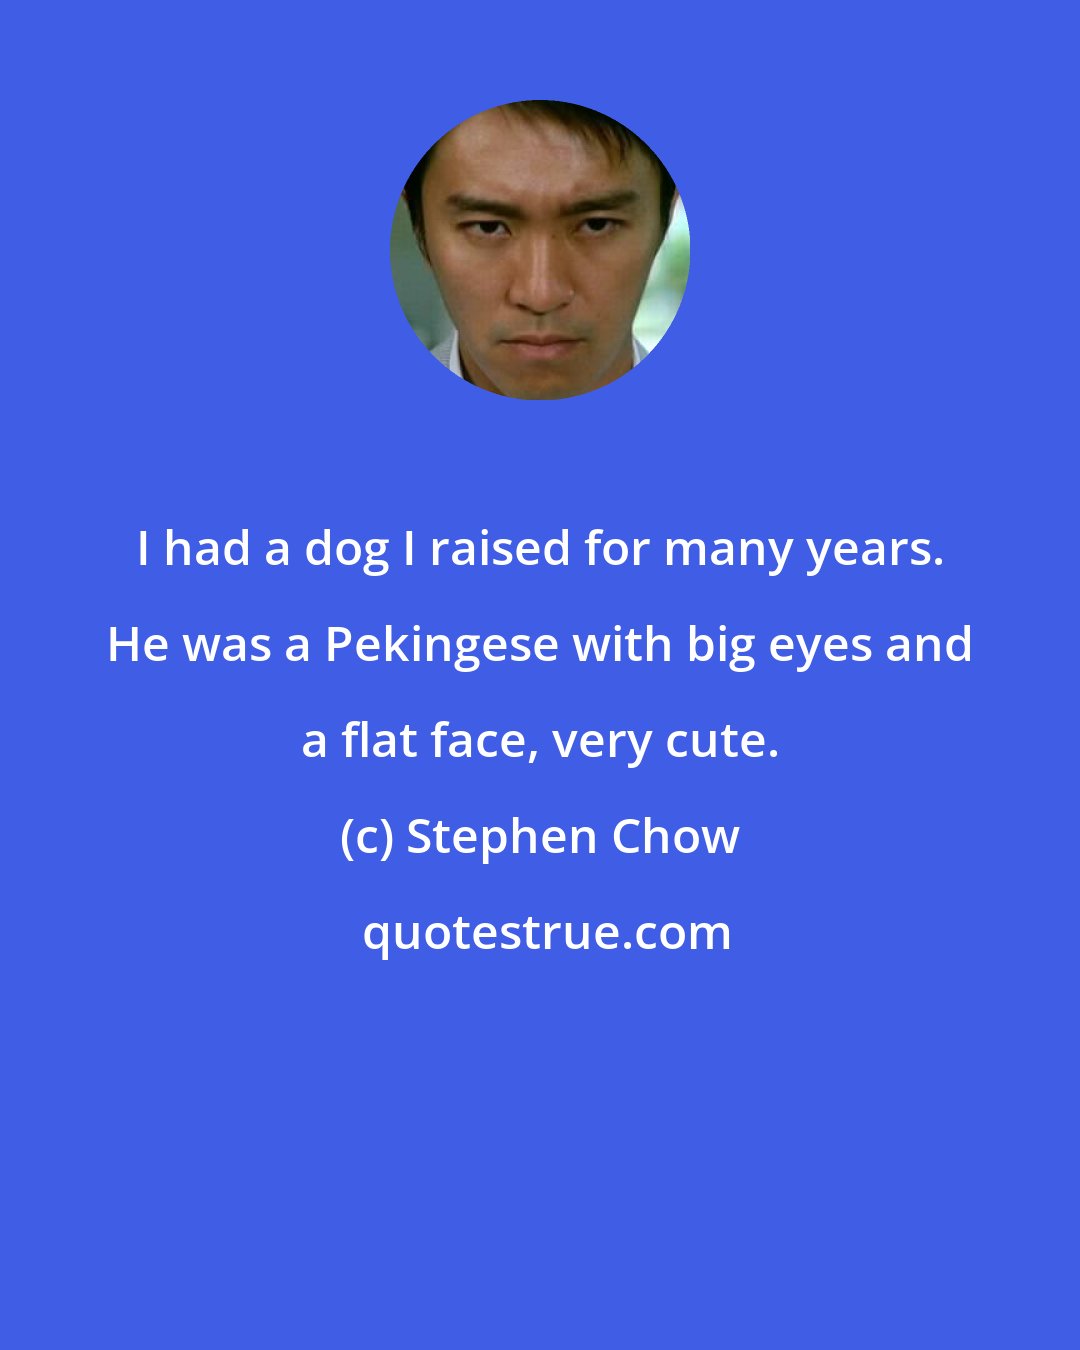 Stephen Chow: I had a dog I raised for many years. He was a Pekingese with big eyes and a flat face, very cute.